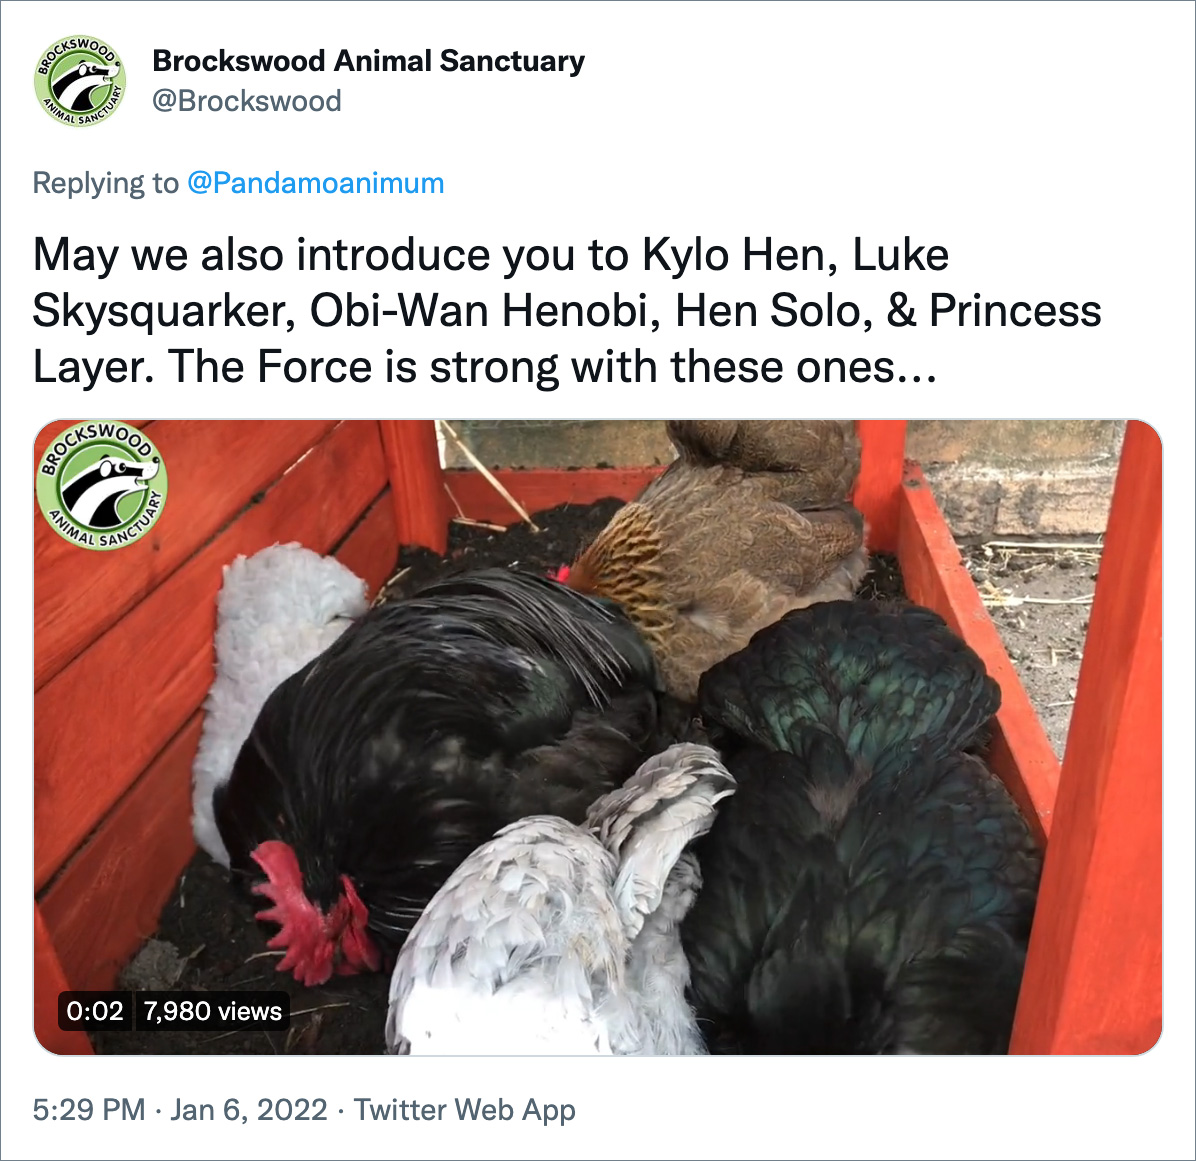 May we also introduce you to Kylo Hen, Luke Skysquarker, Obi-Wan Henobi, Hen Solo, & Princess Layer. The Force is strong with these ones...